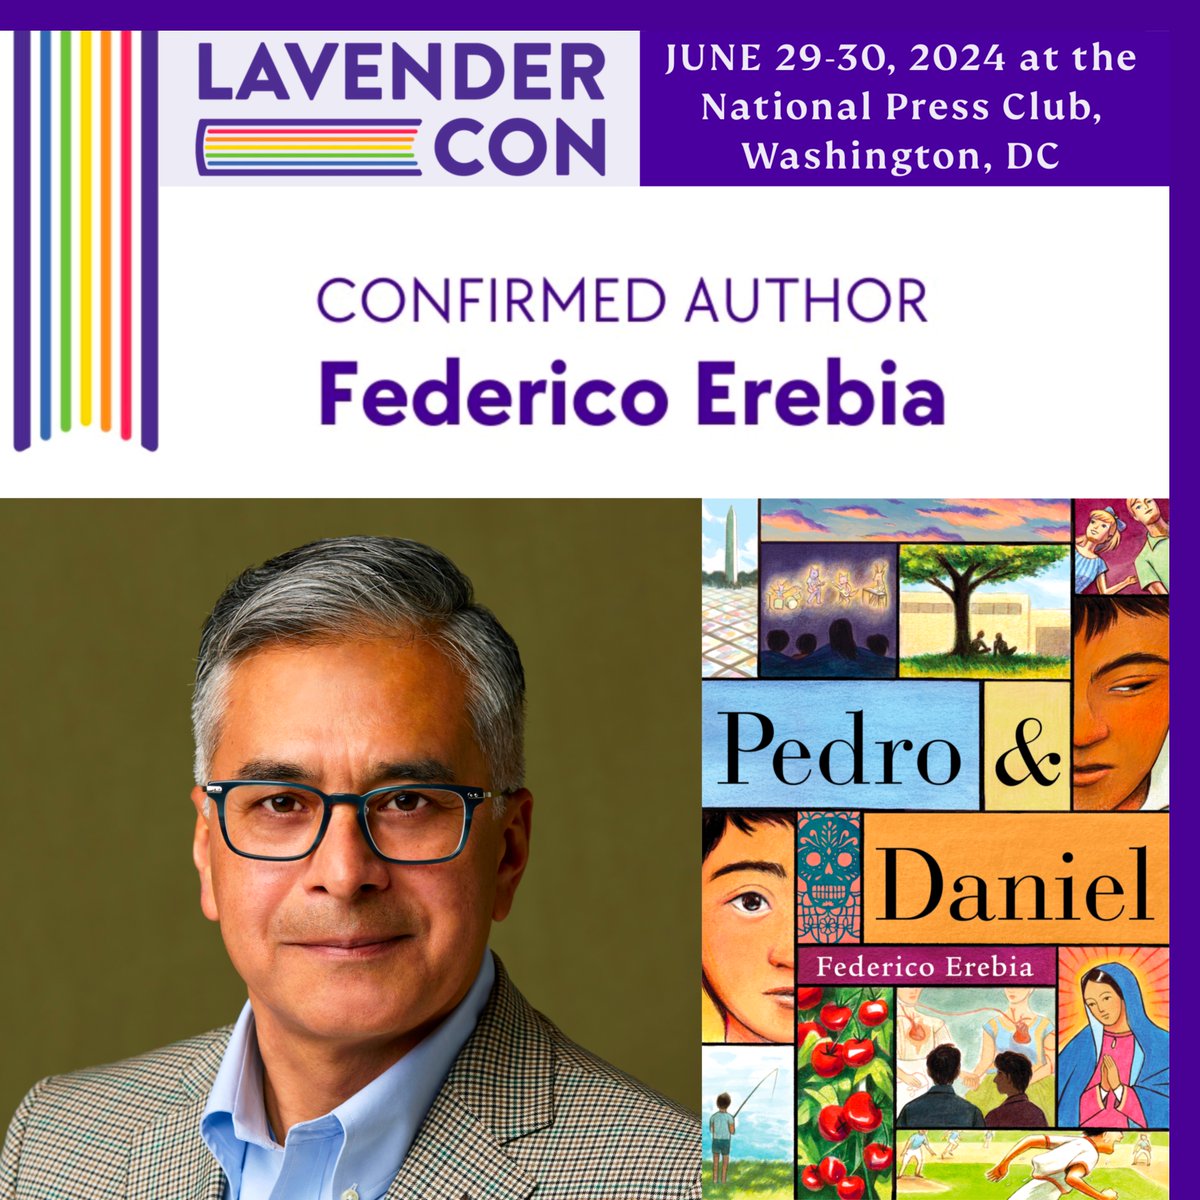 I'll be at LAVENDER CON this June!

Details & tickets at LavenderCon.com

#PedroAndDaniel #PedroWithoutDaniel #BookTwitter #LibraryTwitter #TeacherTwitter #LGBT #LGBTbooks